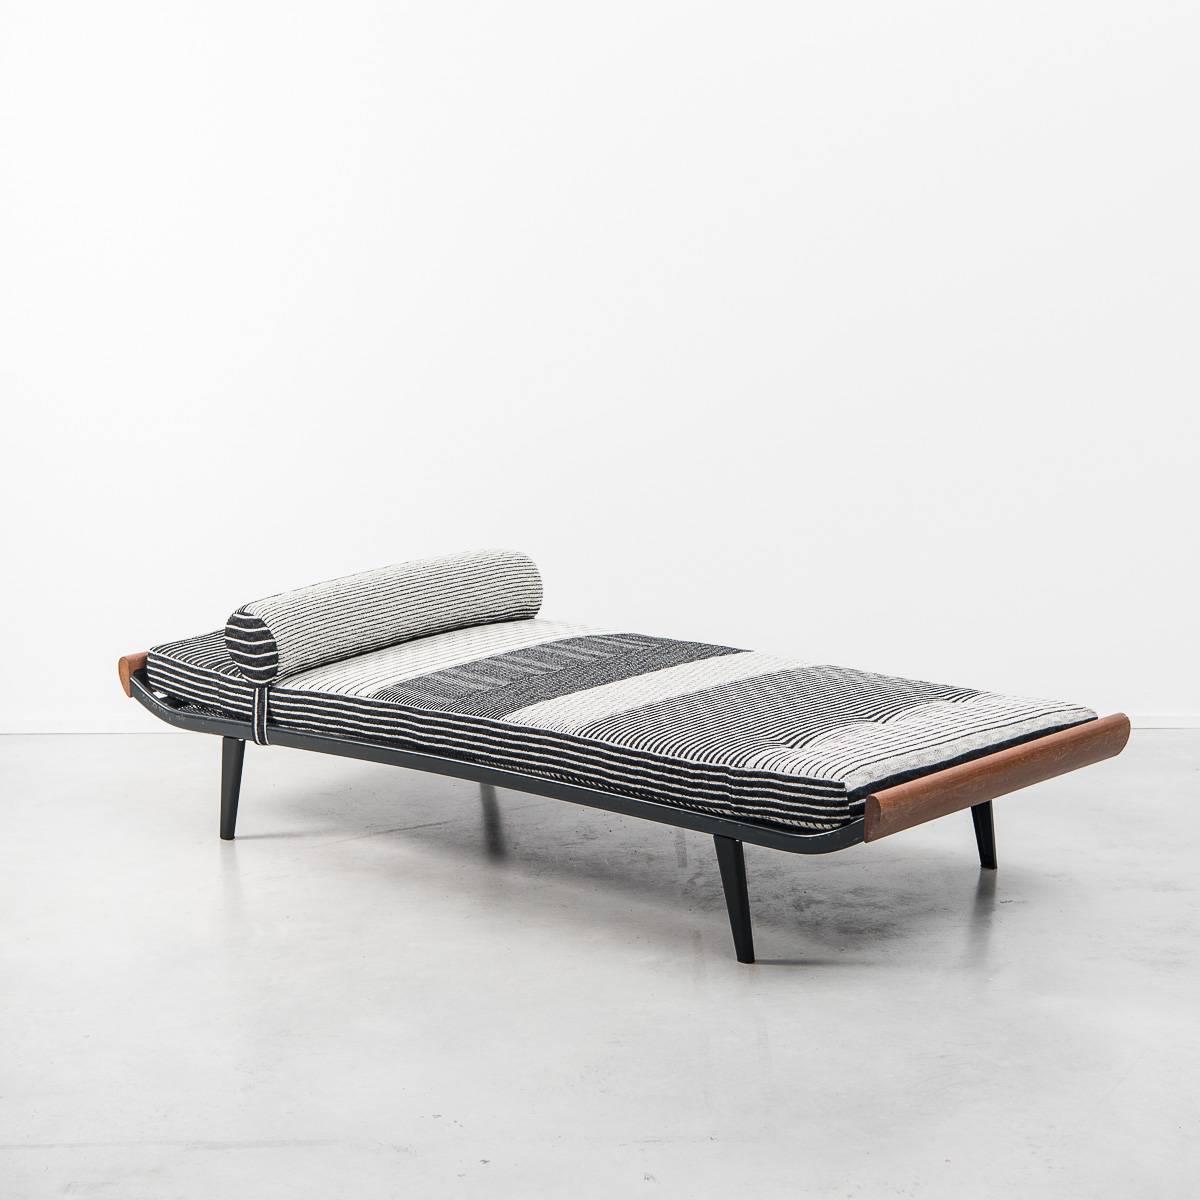 This Minimalist ‘Cleopatra’ daybed was designed by Dutch designer, Dick Cordemeijer, for Auping. Minimalist clean lines. Metal frame with mattress and a pleasing bolster with detachable strap. Legs unscrew for easy install. Upholstered in a Tibor